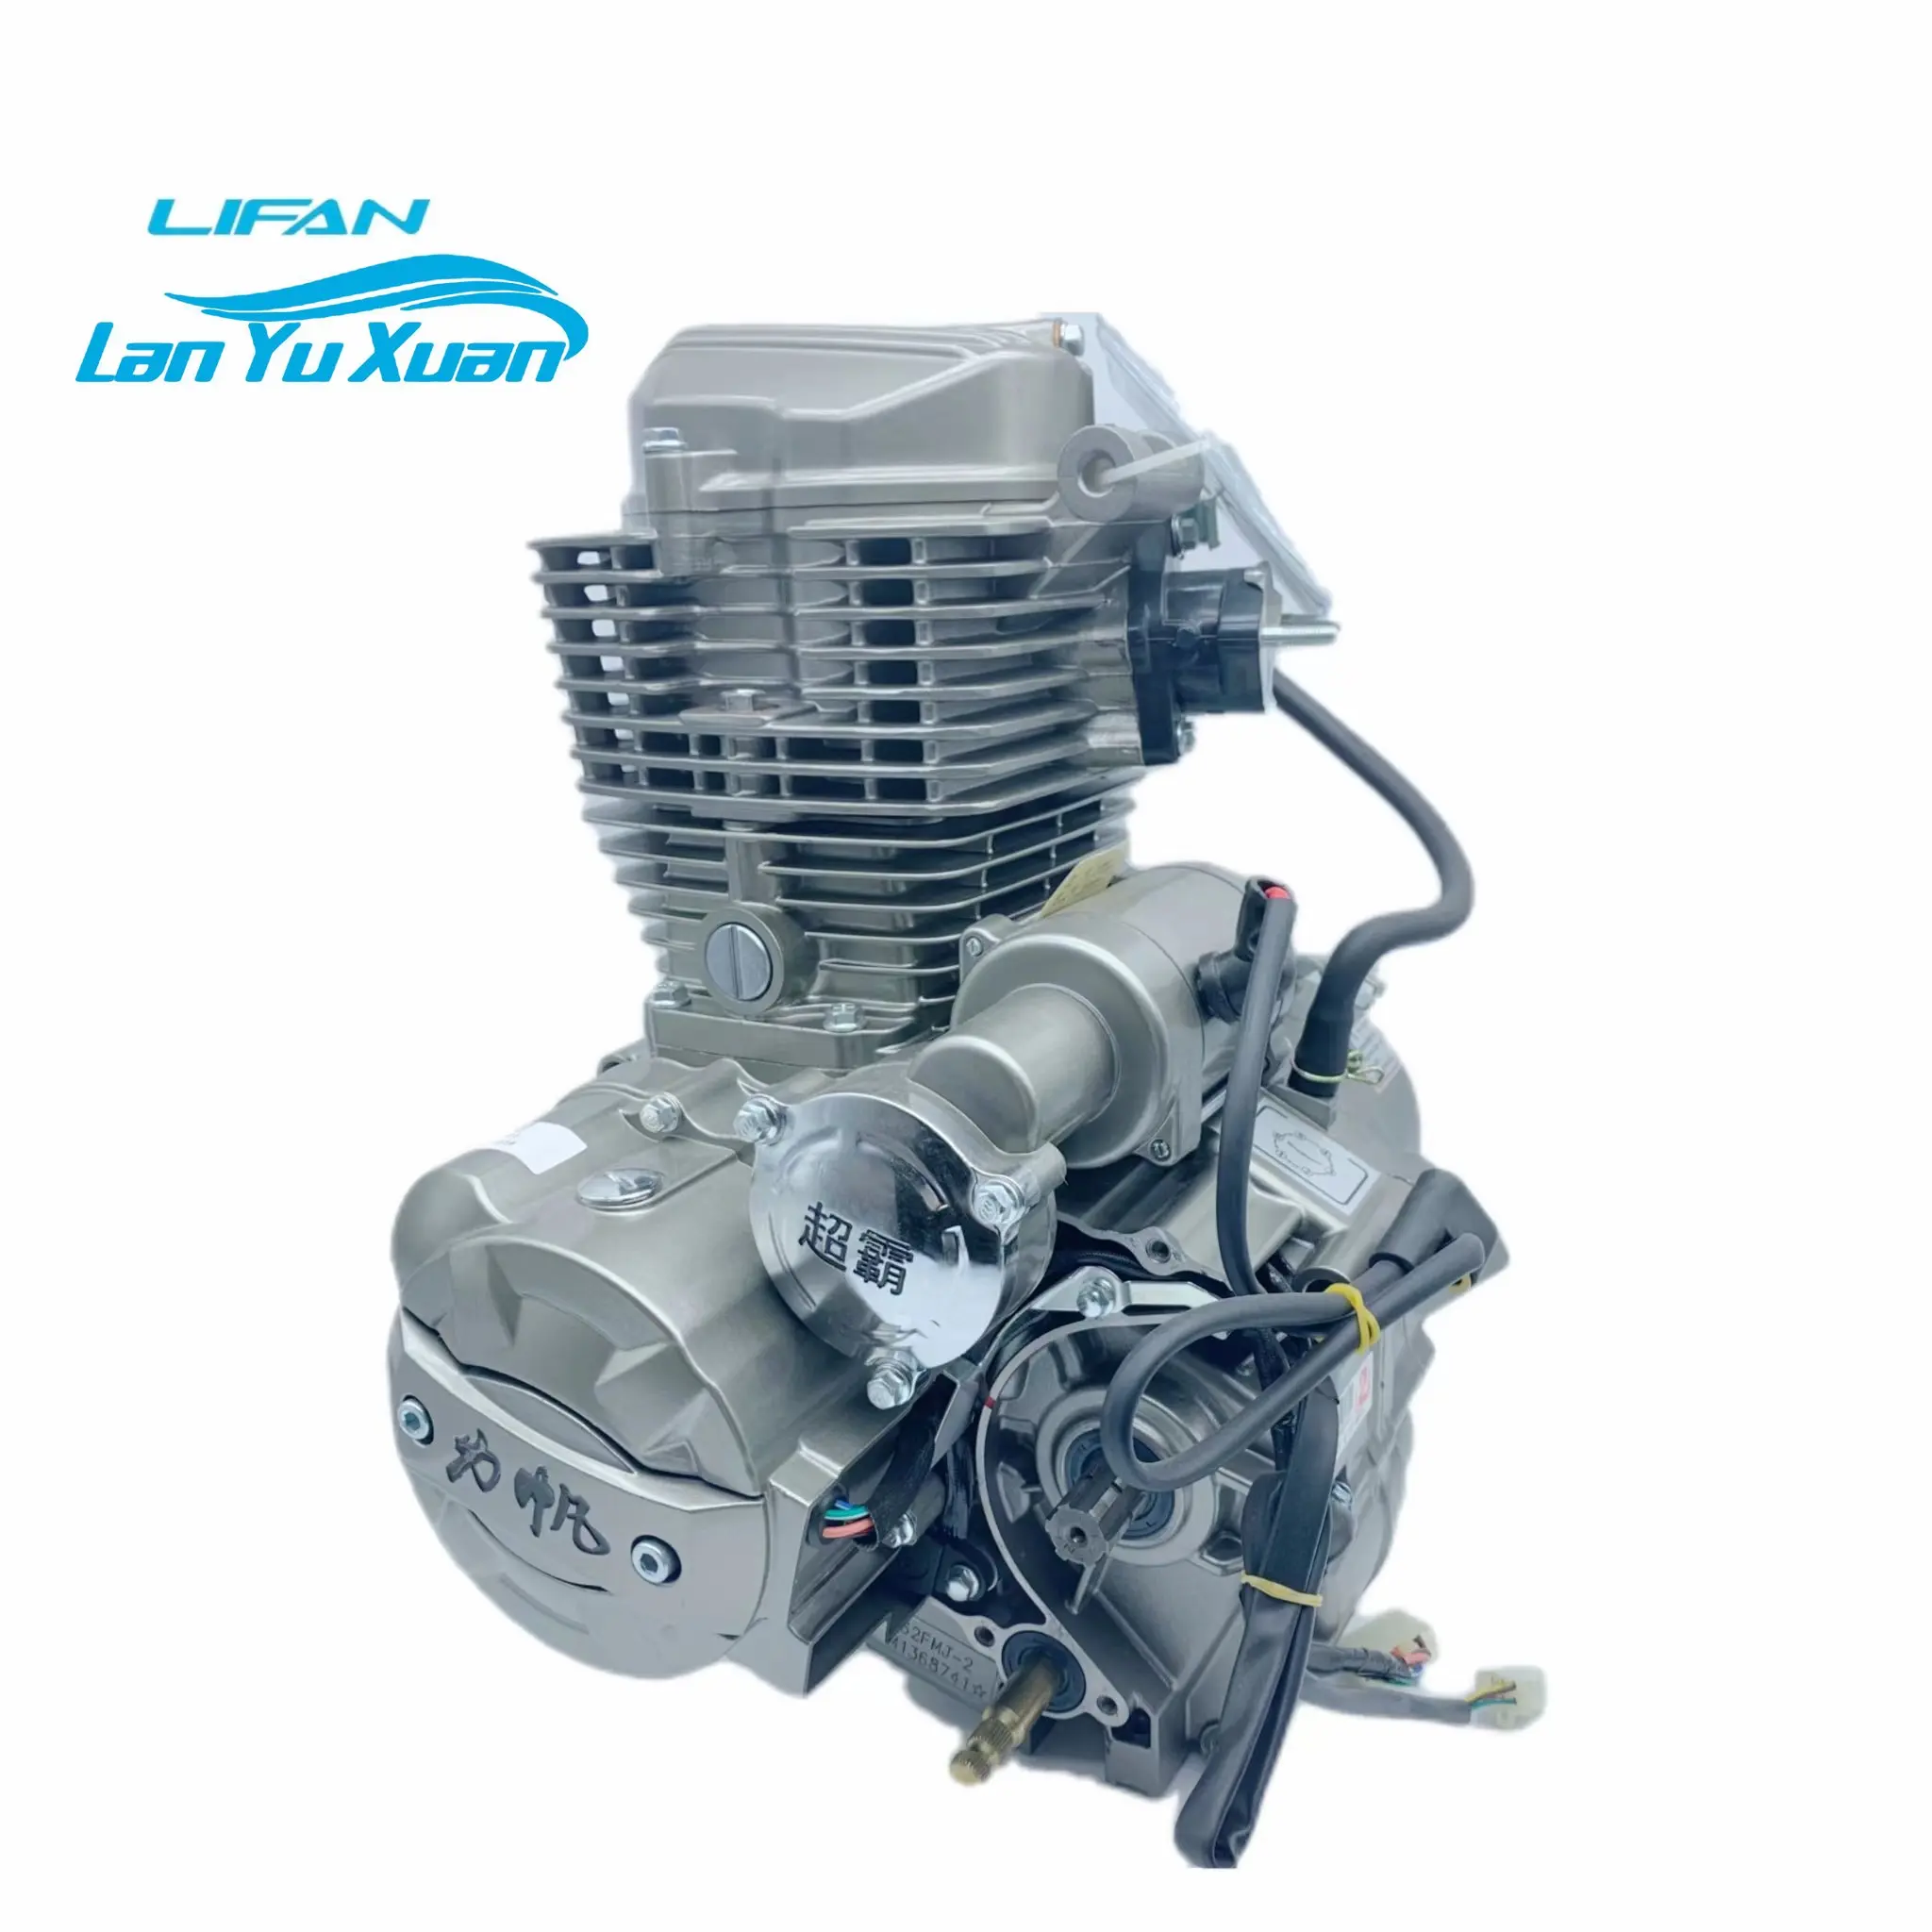 Hot selling Lifan motorcycle 250cc engine Engine motorcycle 250cc, China motorcycle Lifan engine tricycle suitable for freight high quality lifan two wheeler cg250cc cg250 4 stroke air cooled engine for 250cc motor motos motorcyclecustom